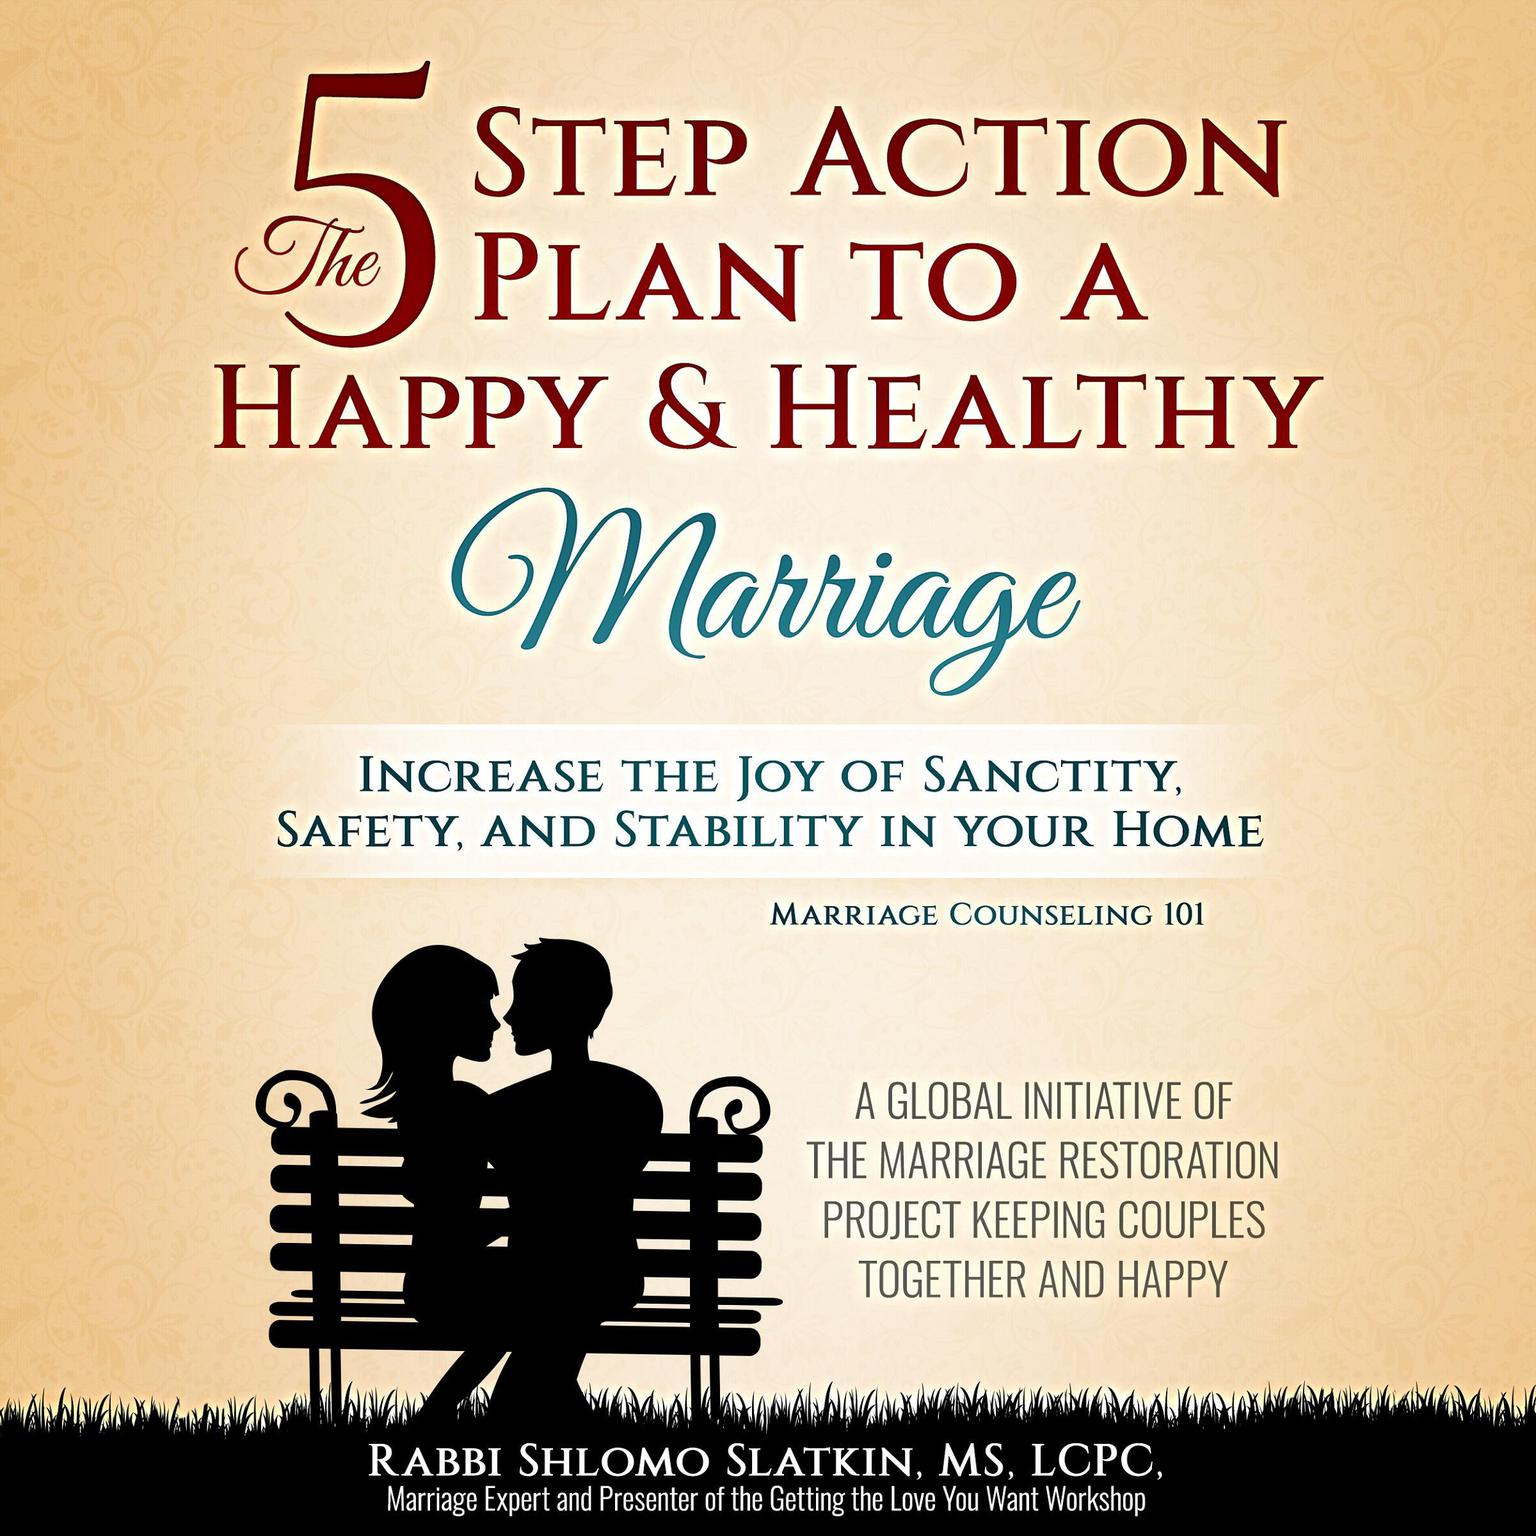 Marriage Counseling 101: The Five Step Action Plan to a Happy & Healthy Marriage. Increase the Joy of Sanctity, Safety, and Stability in Your Home Audiobook, by Rabbi Shlomo Slatkin